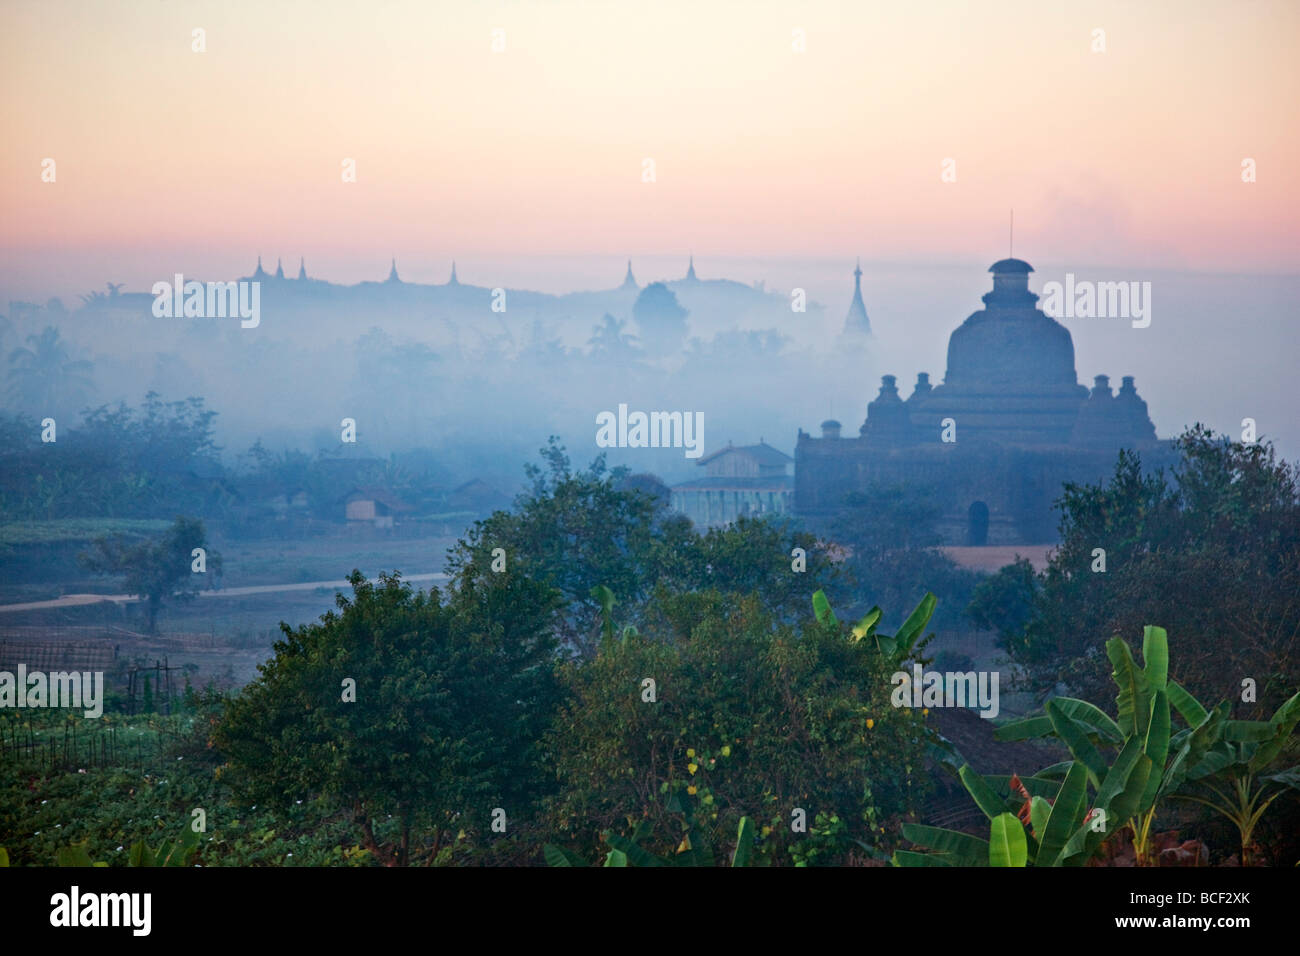 Early morning mist shrouds the historic temples of Mrauk U, built in the Rakhine style between the 15th and 17th centuries. Stock Photo